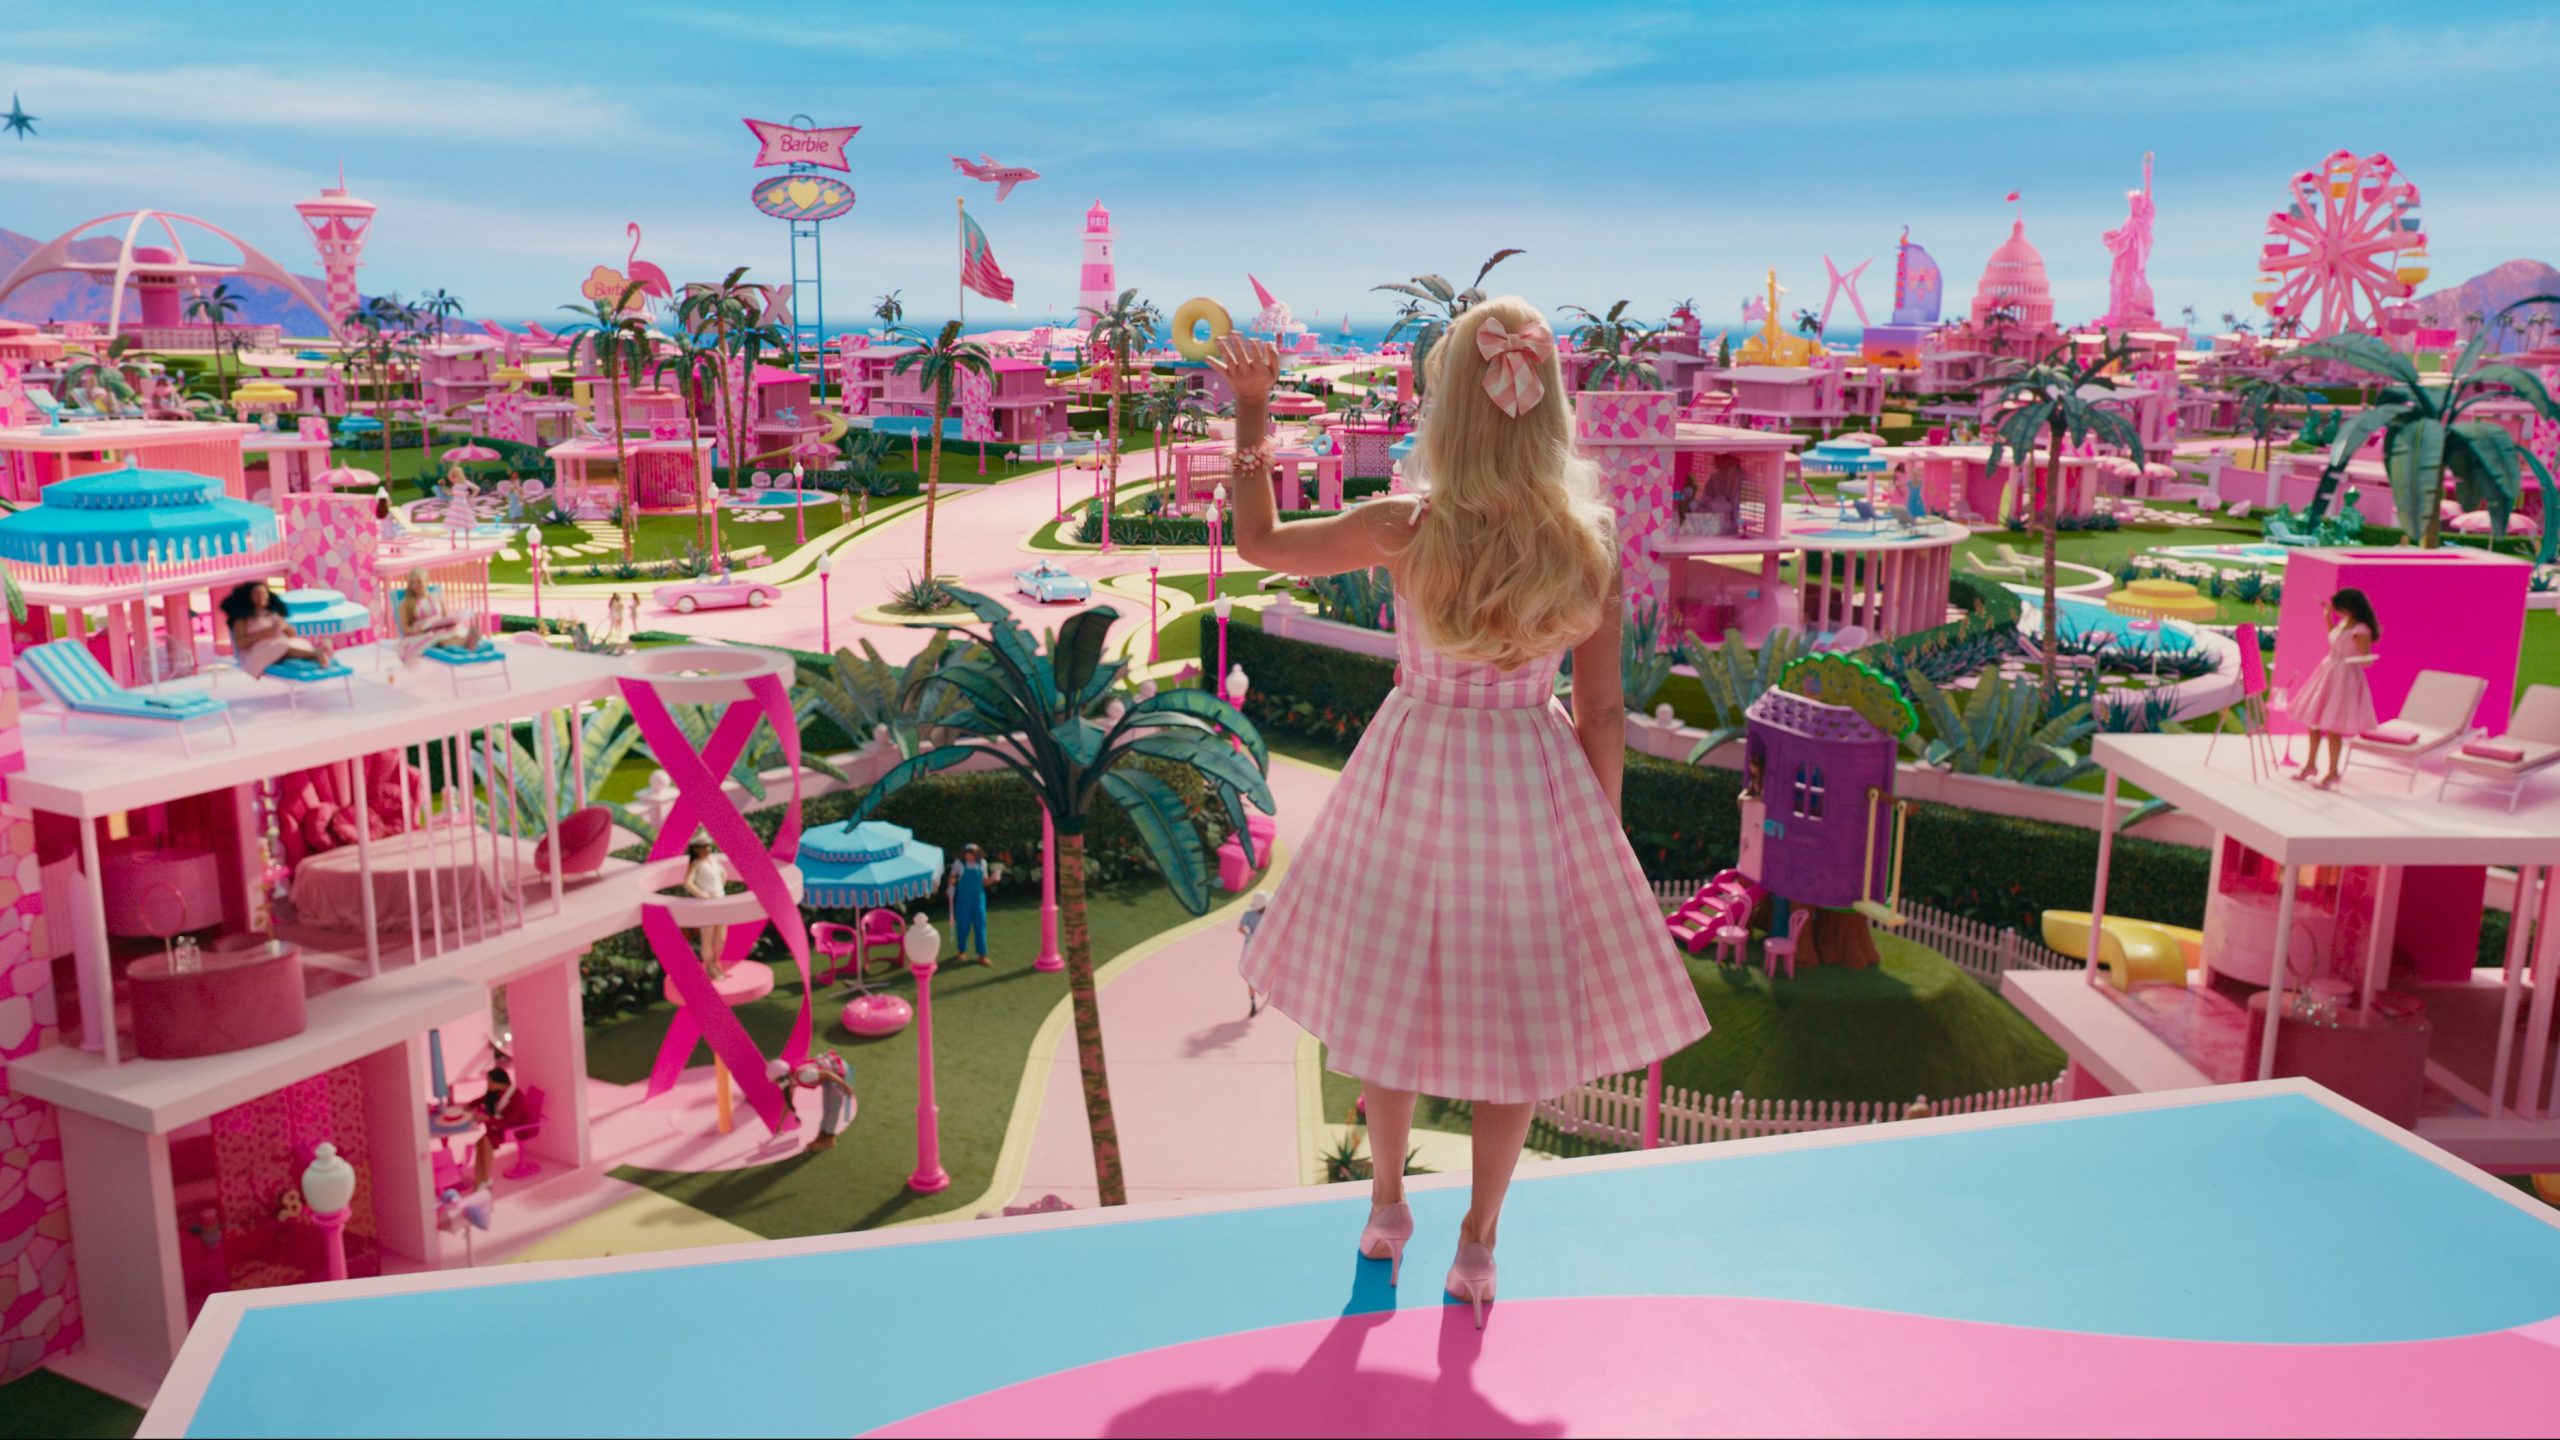 The Song 'Barbie Girl' Tragically Won't Be in the Upcoming Barbie Movie